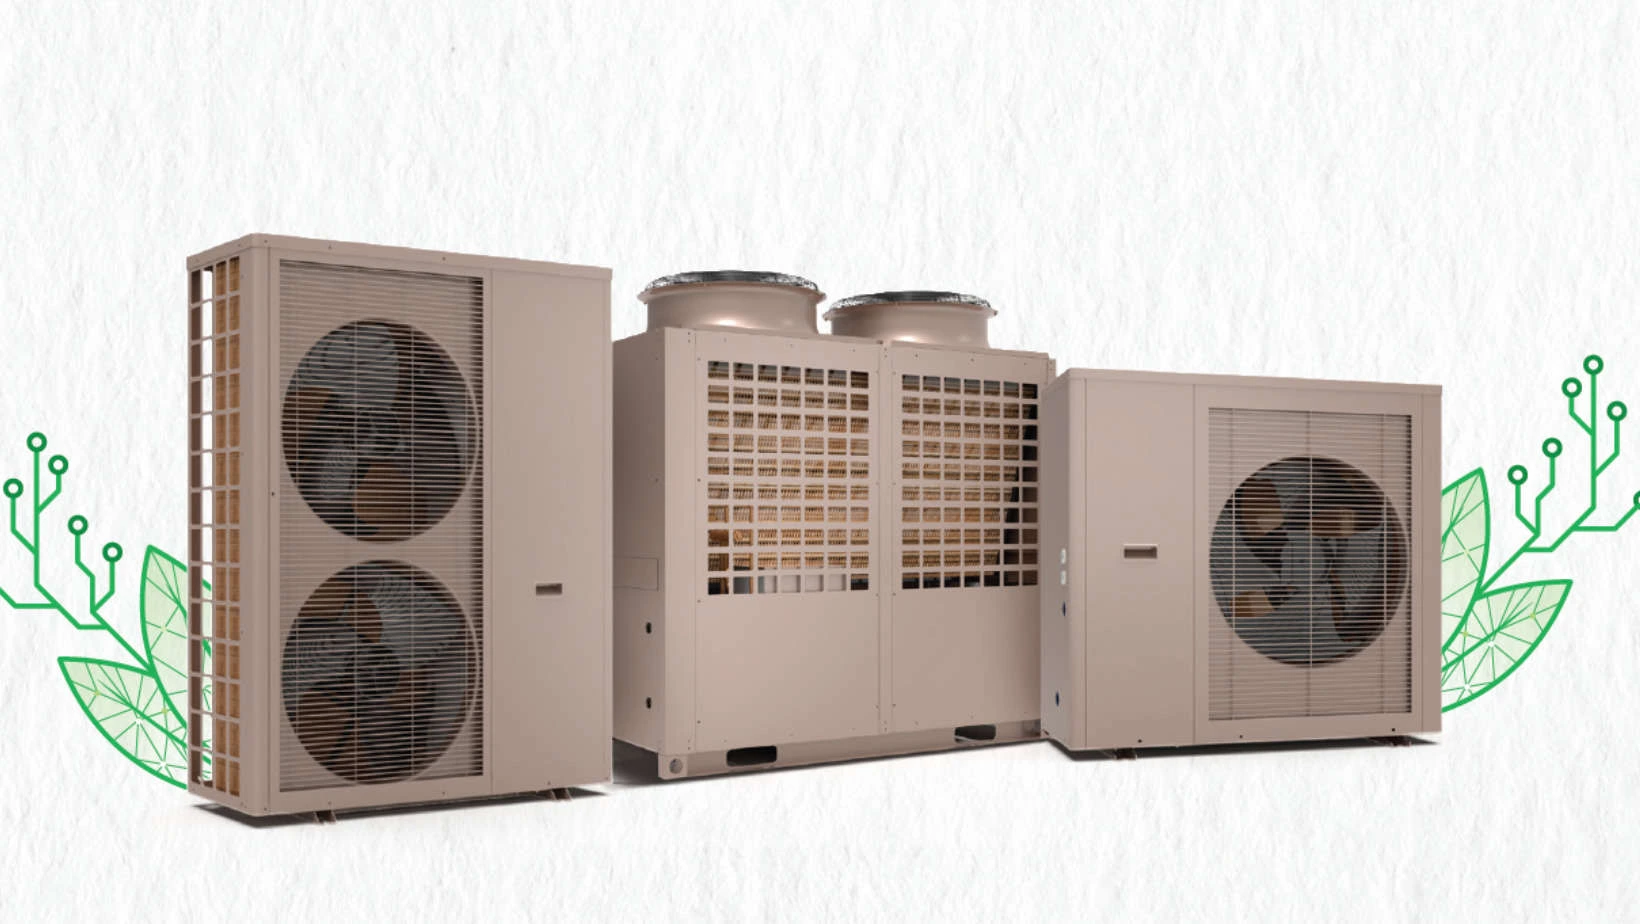 Revolutionizing ،t water: The unmatched advantages of Racold heat pump water heaters